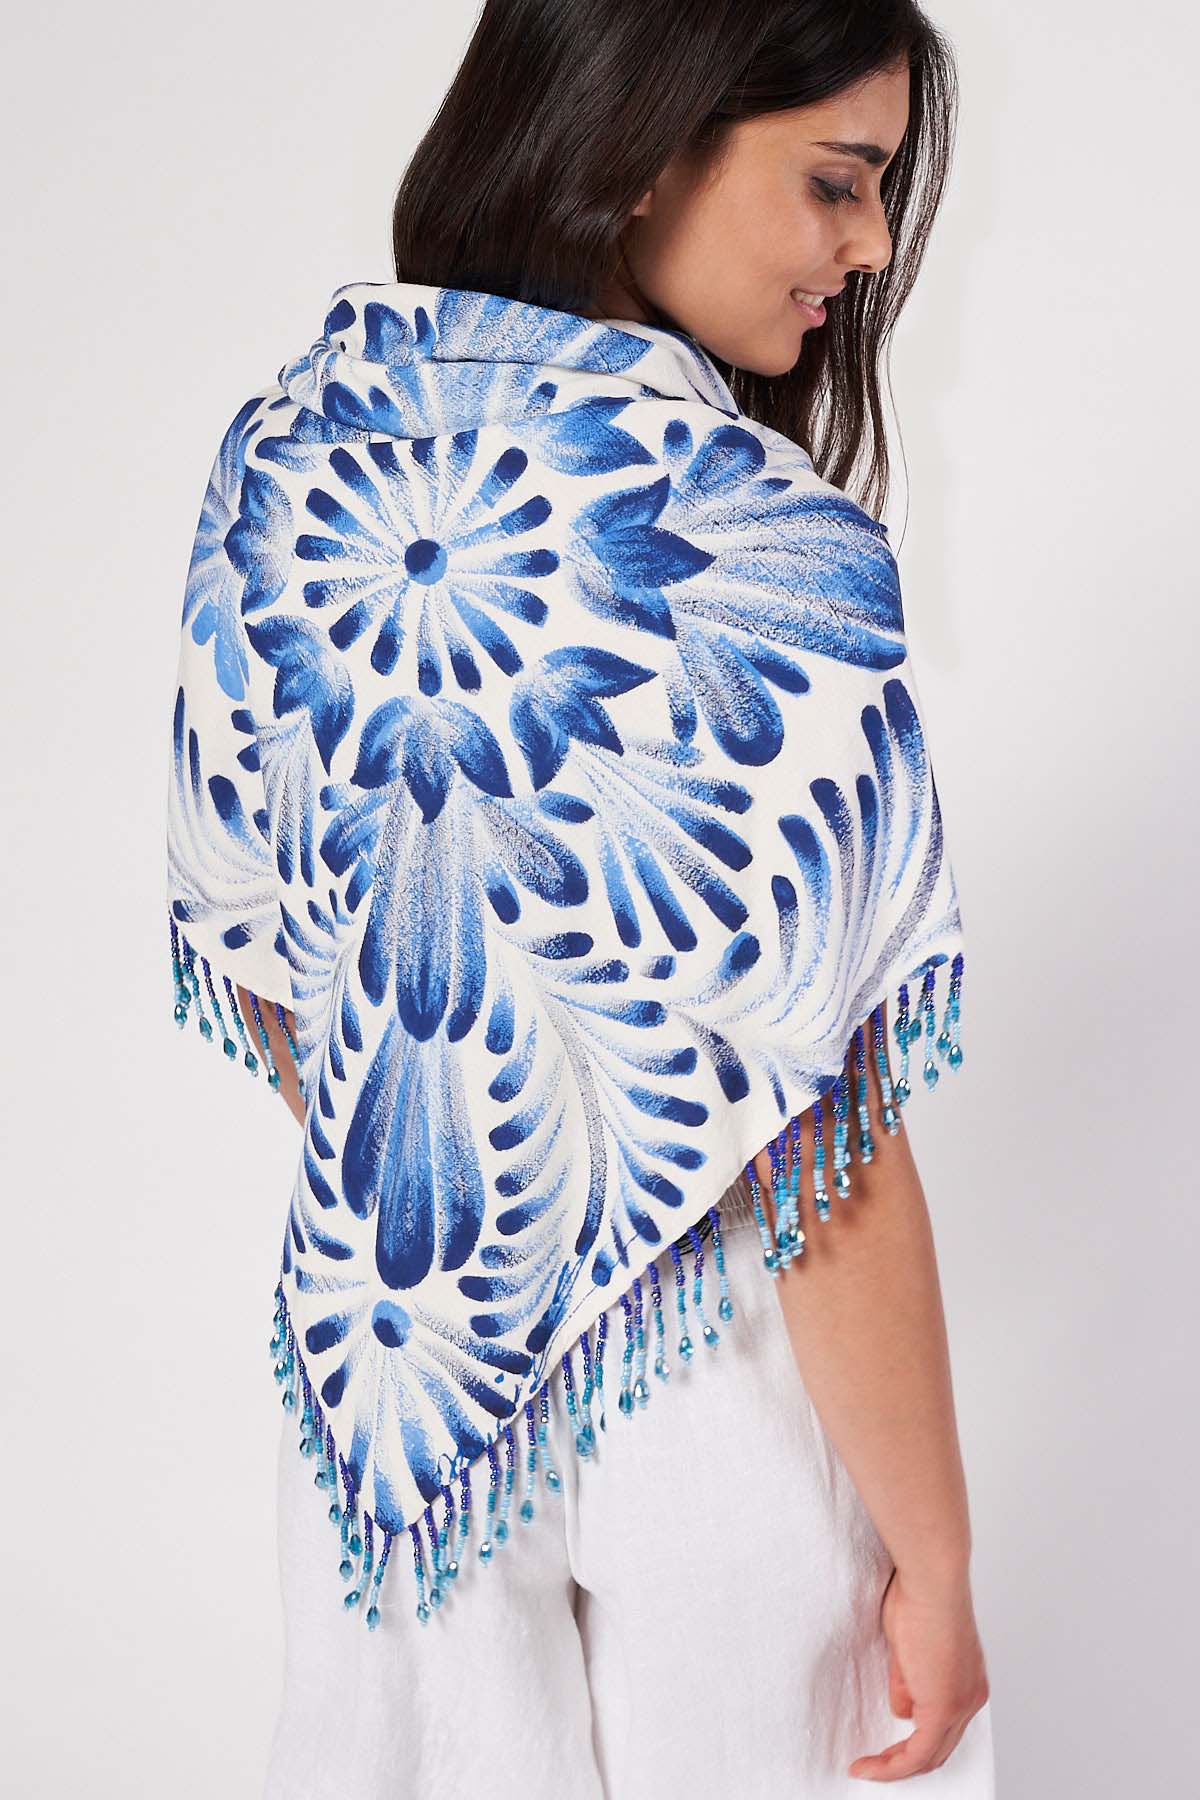 HAND-PAINTED AND HAND-EMBROIDERED TRIANGULAR SHAWL WITH BEADED FRINGE - TALAVERA AZUL